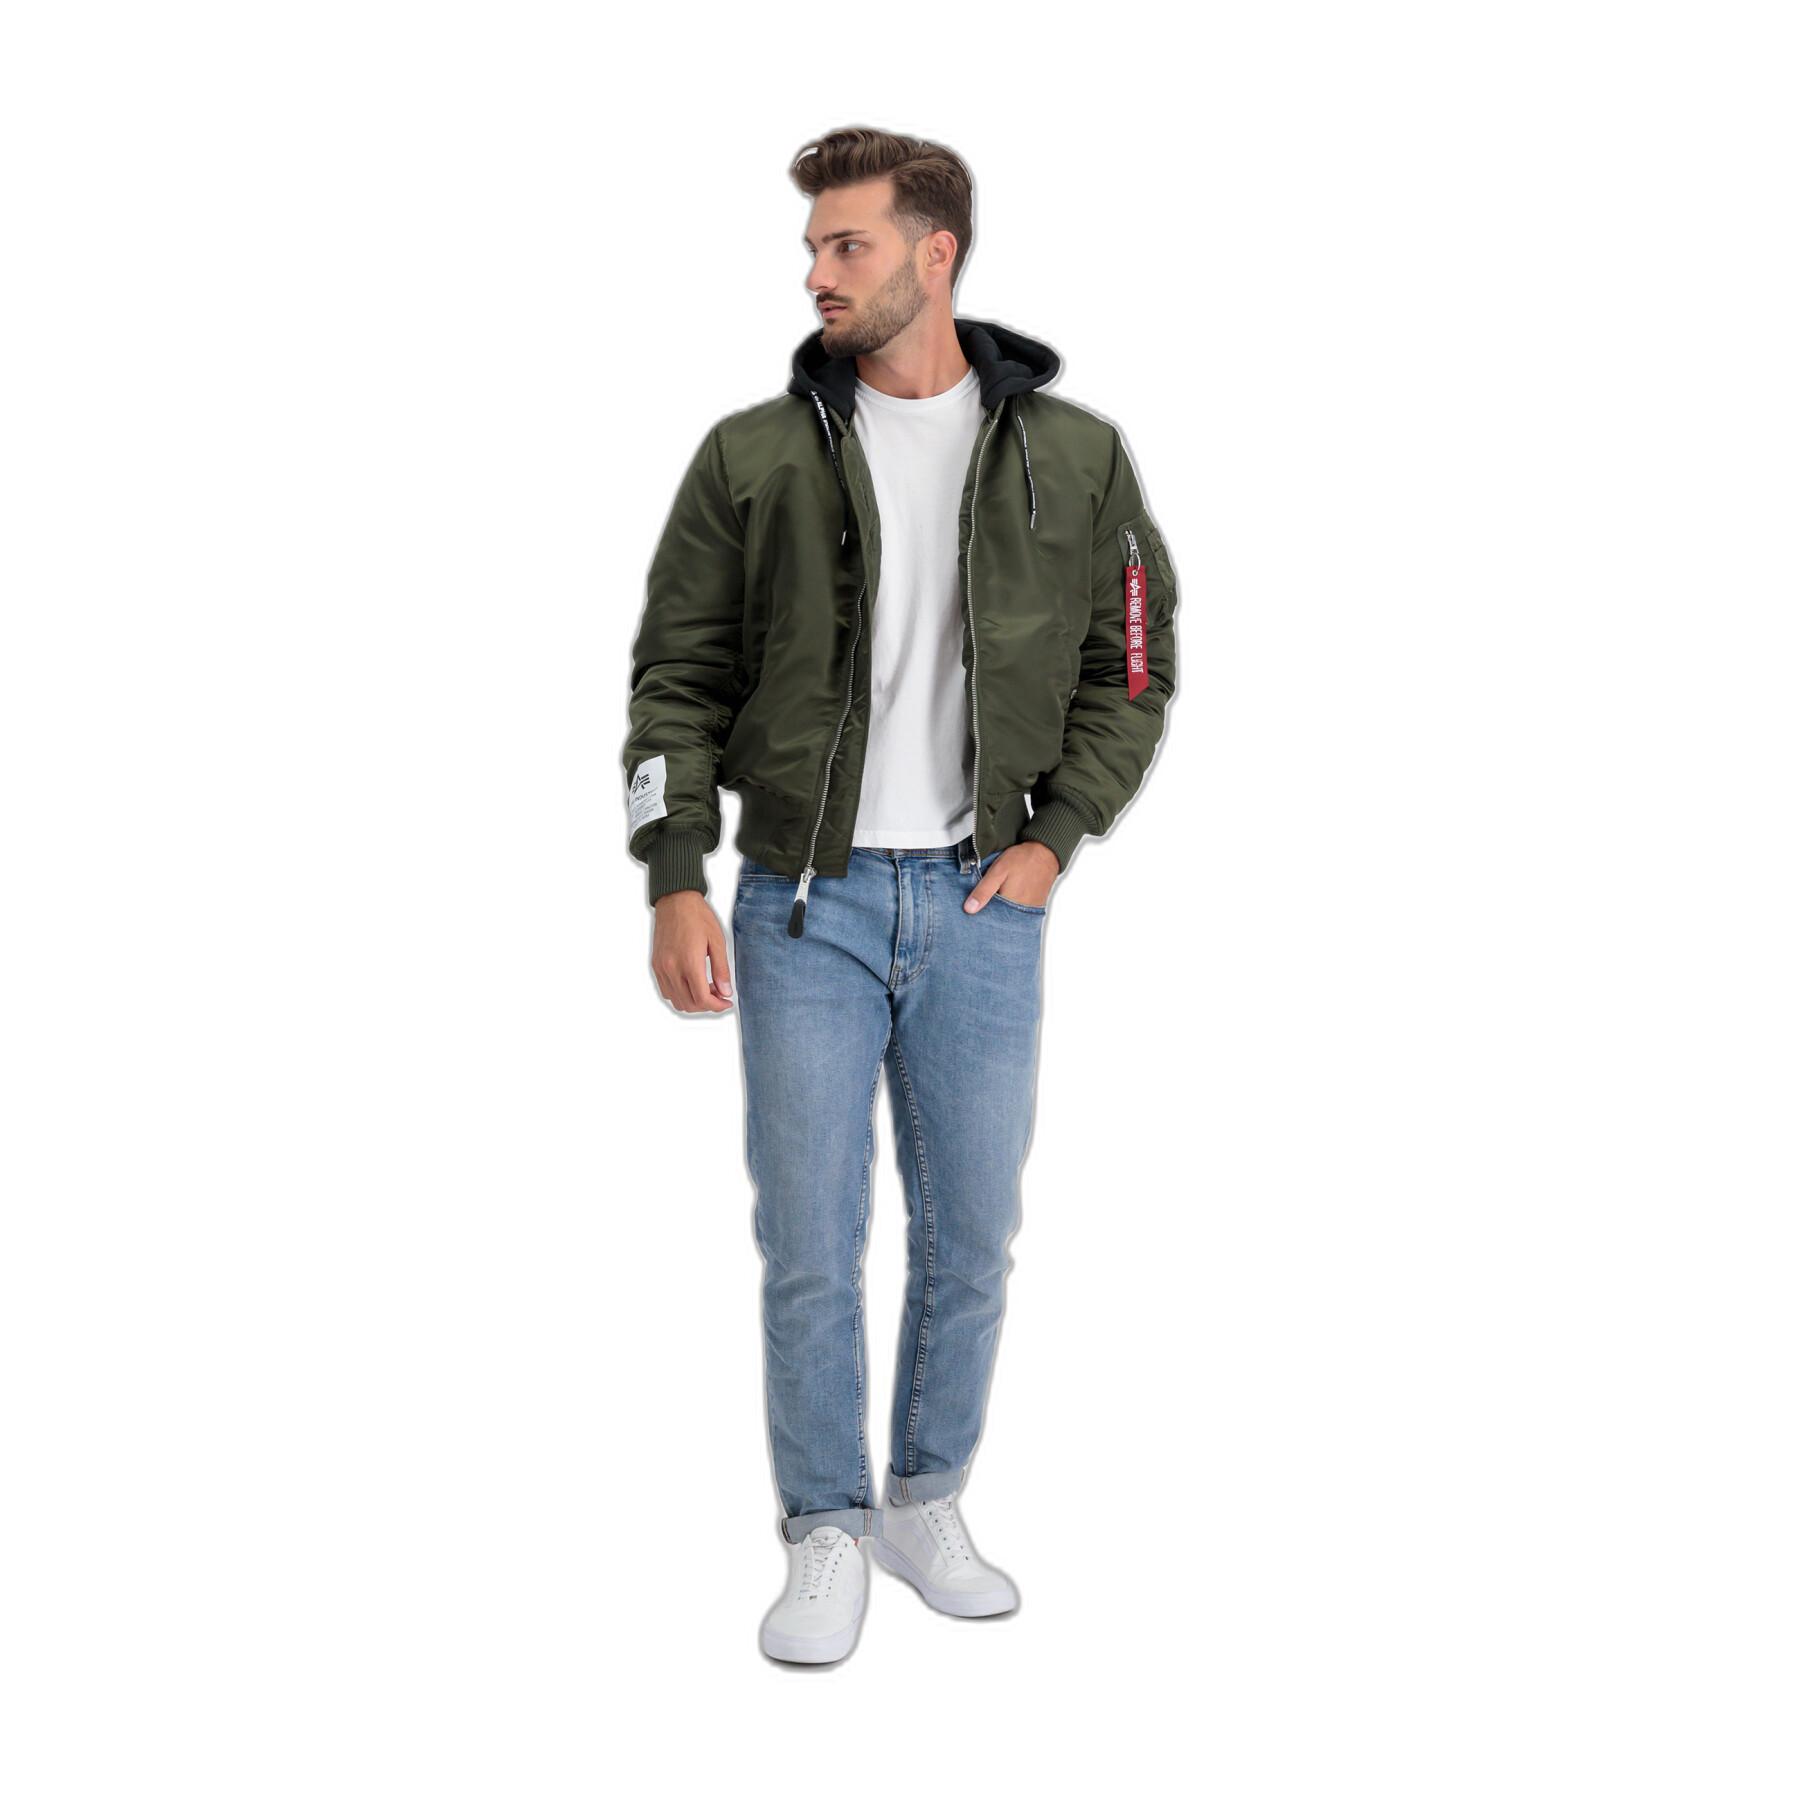 Bomber Alpha Industries MA-1 ZHP